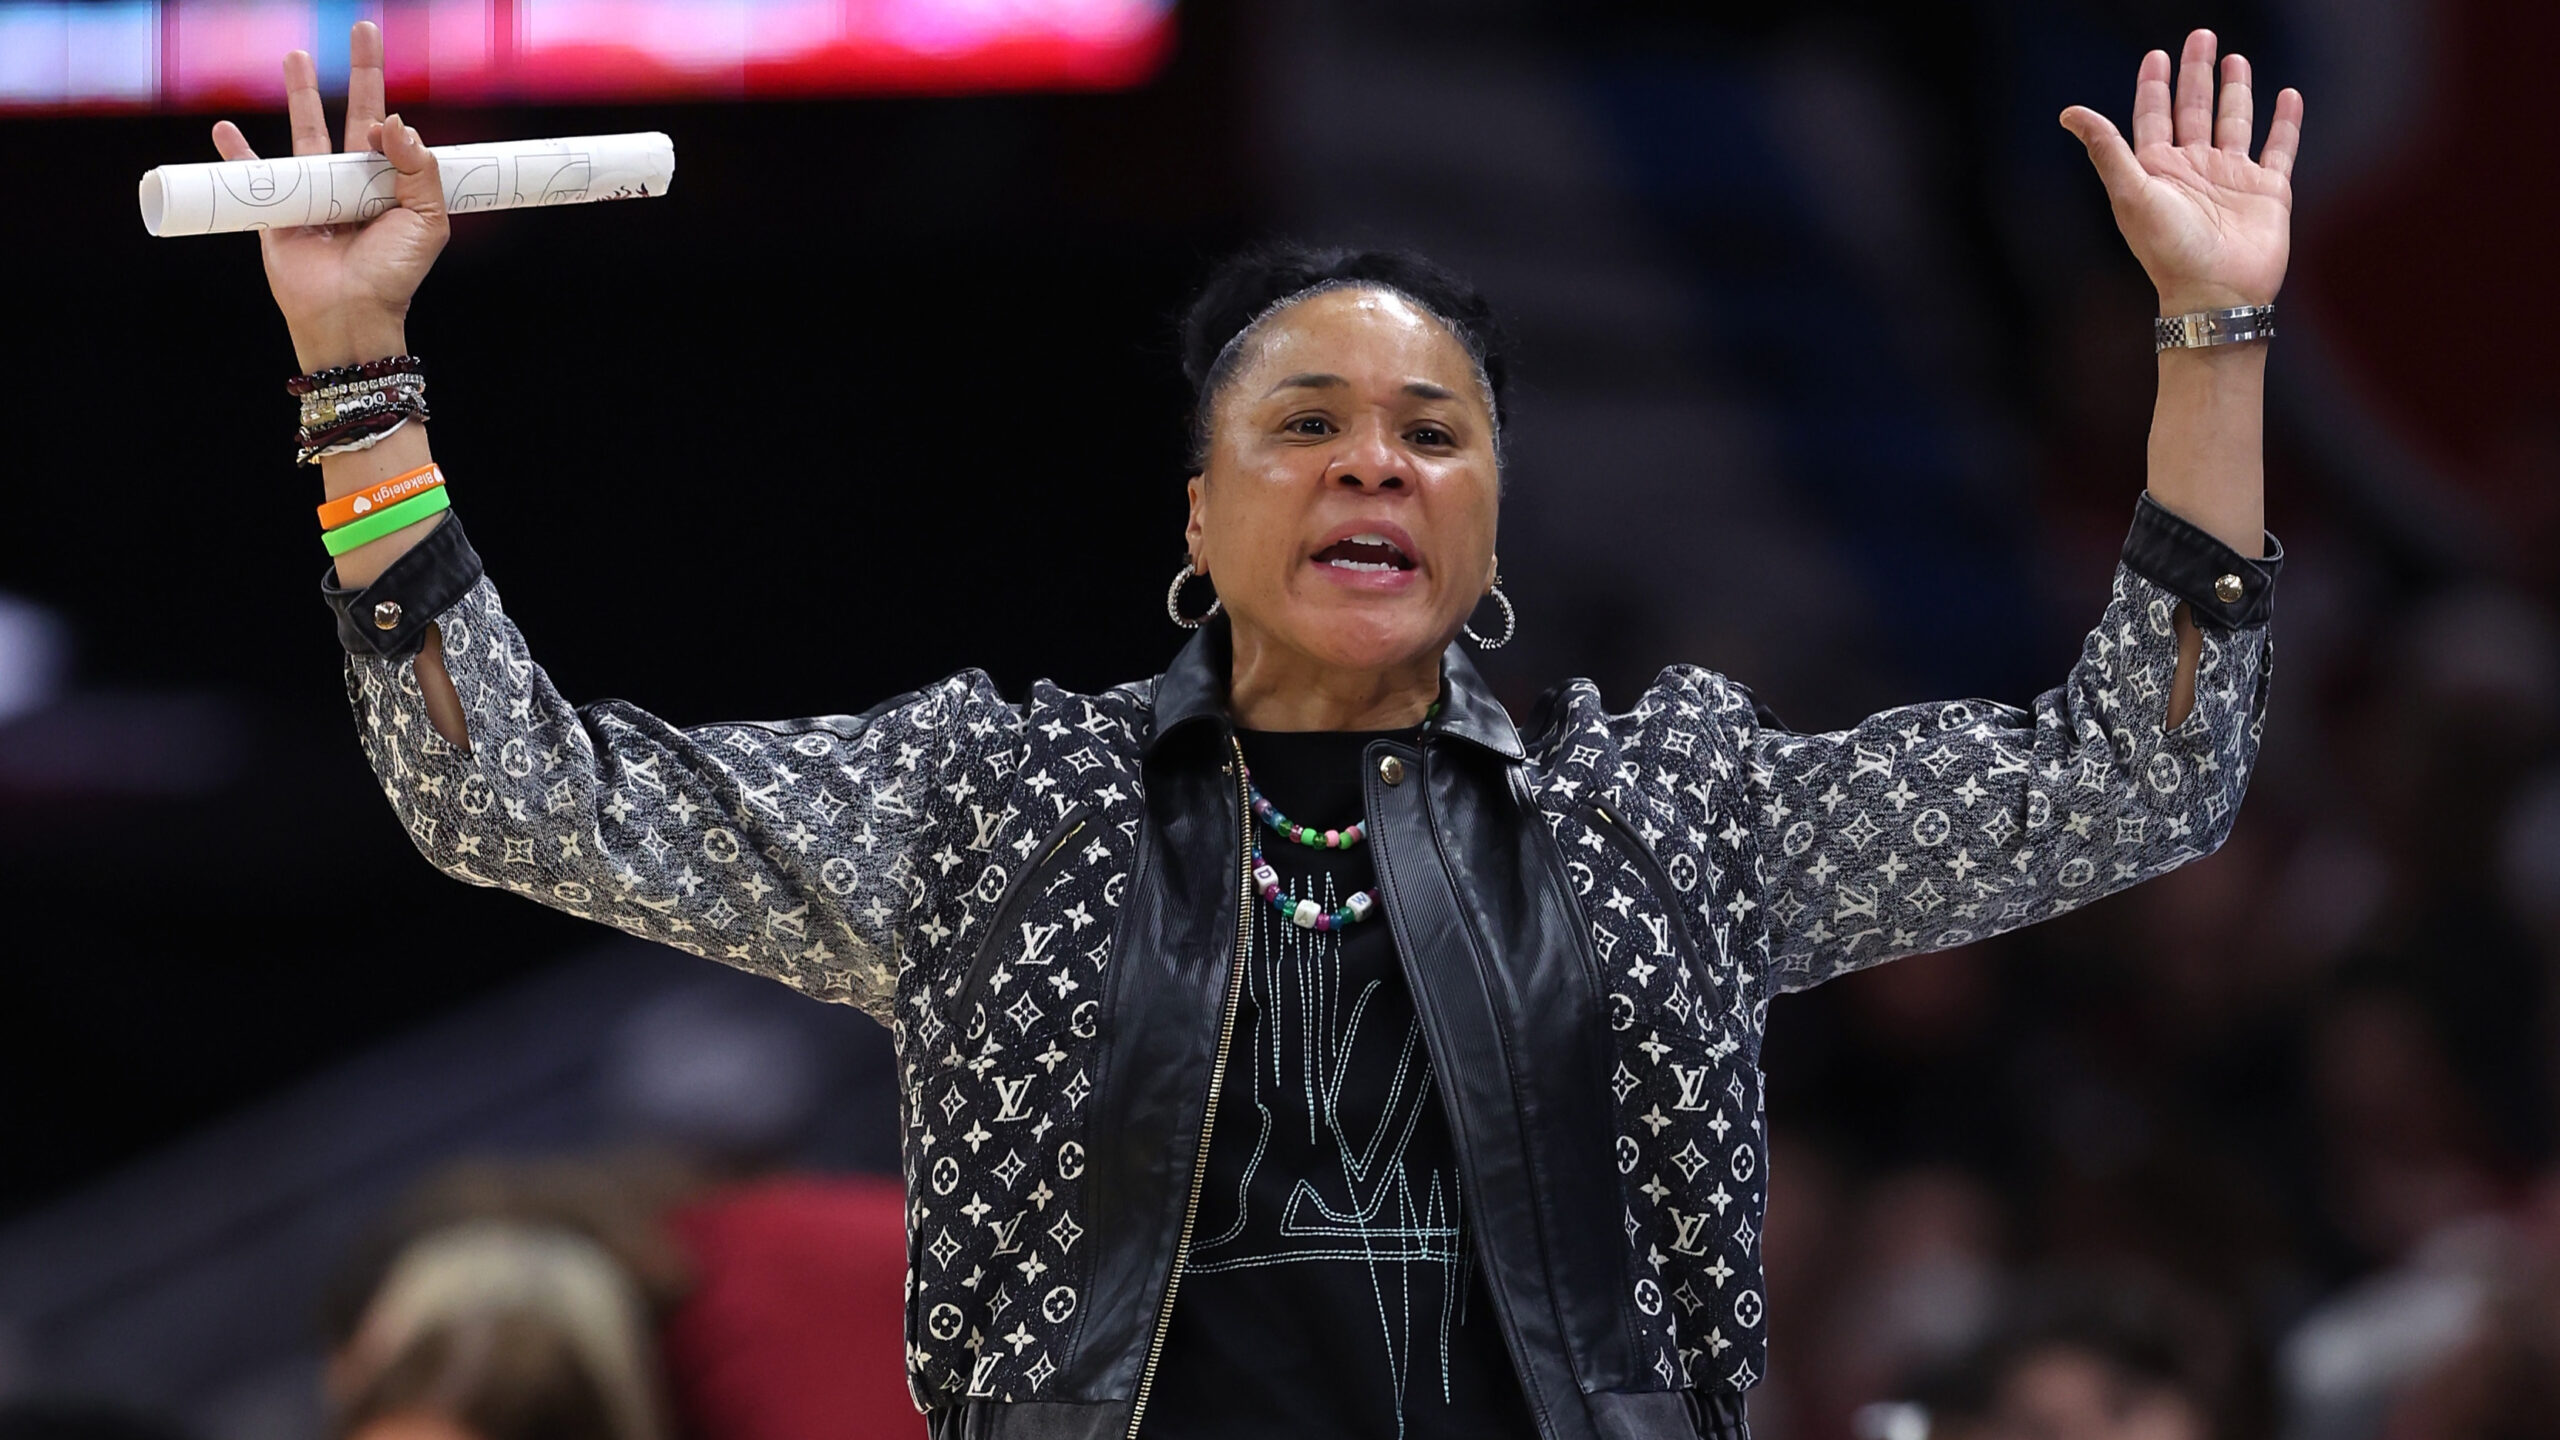 Women’s basketball coach Dawn Staley faces backlash on X platform for comments about transgender athletes